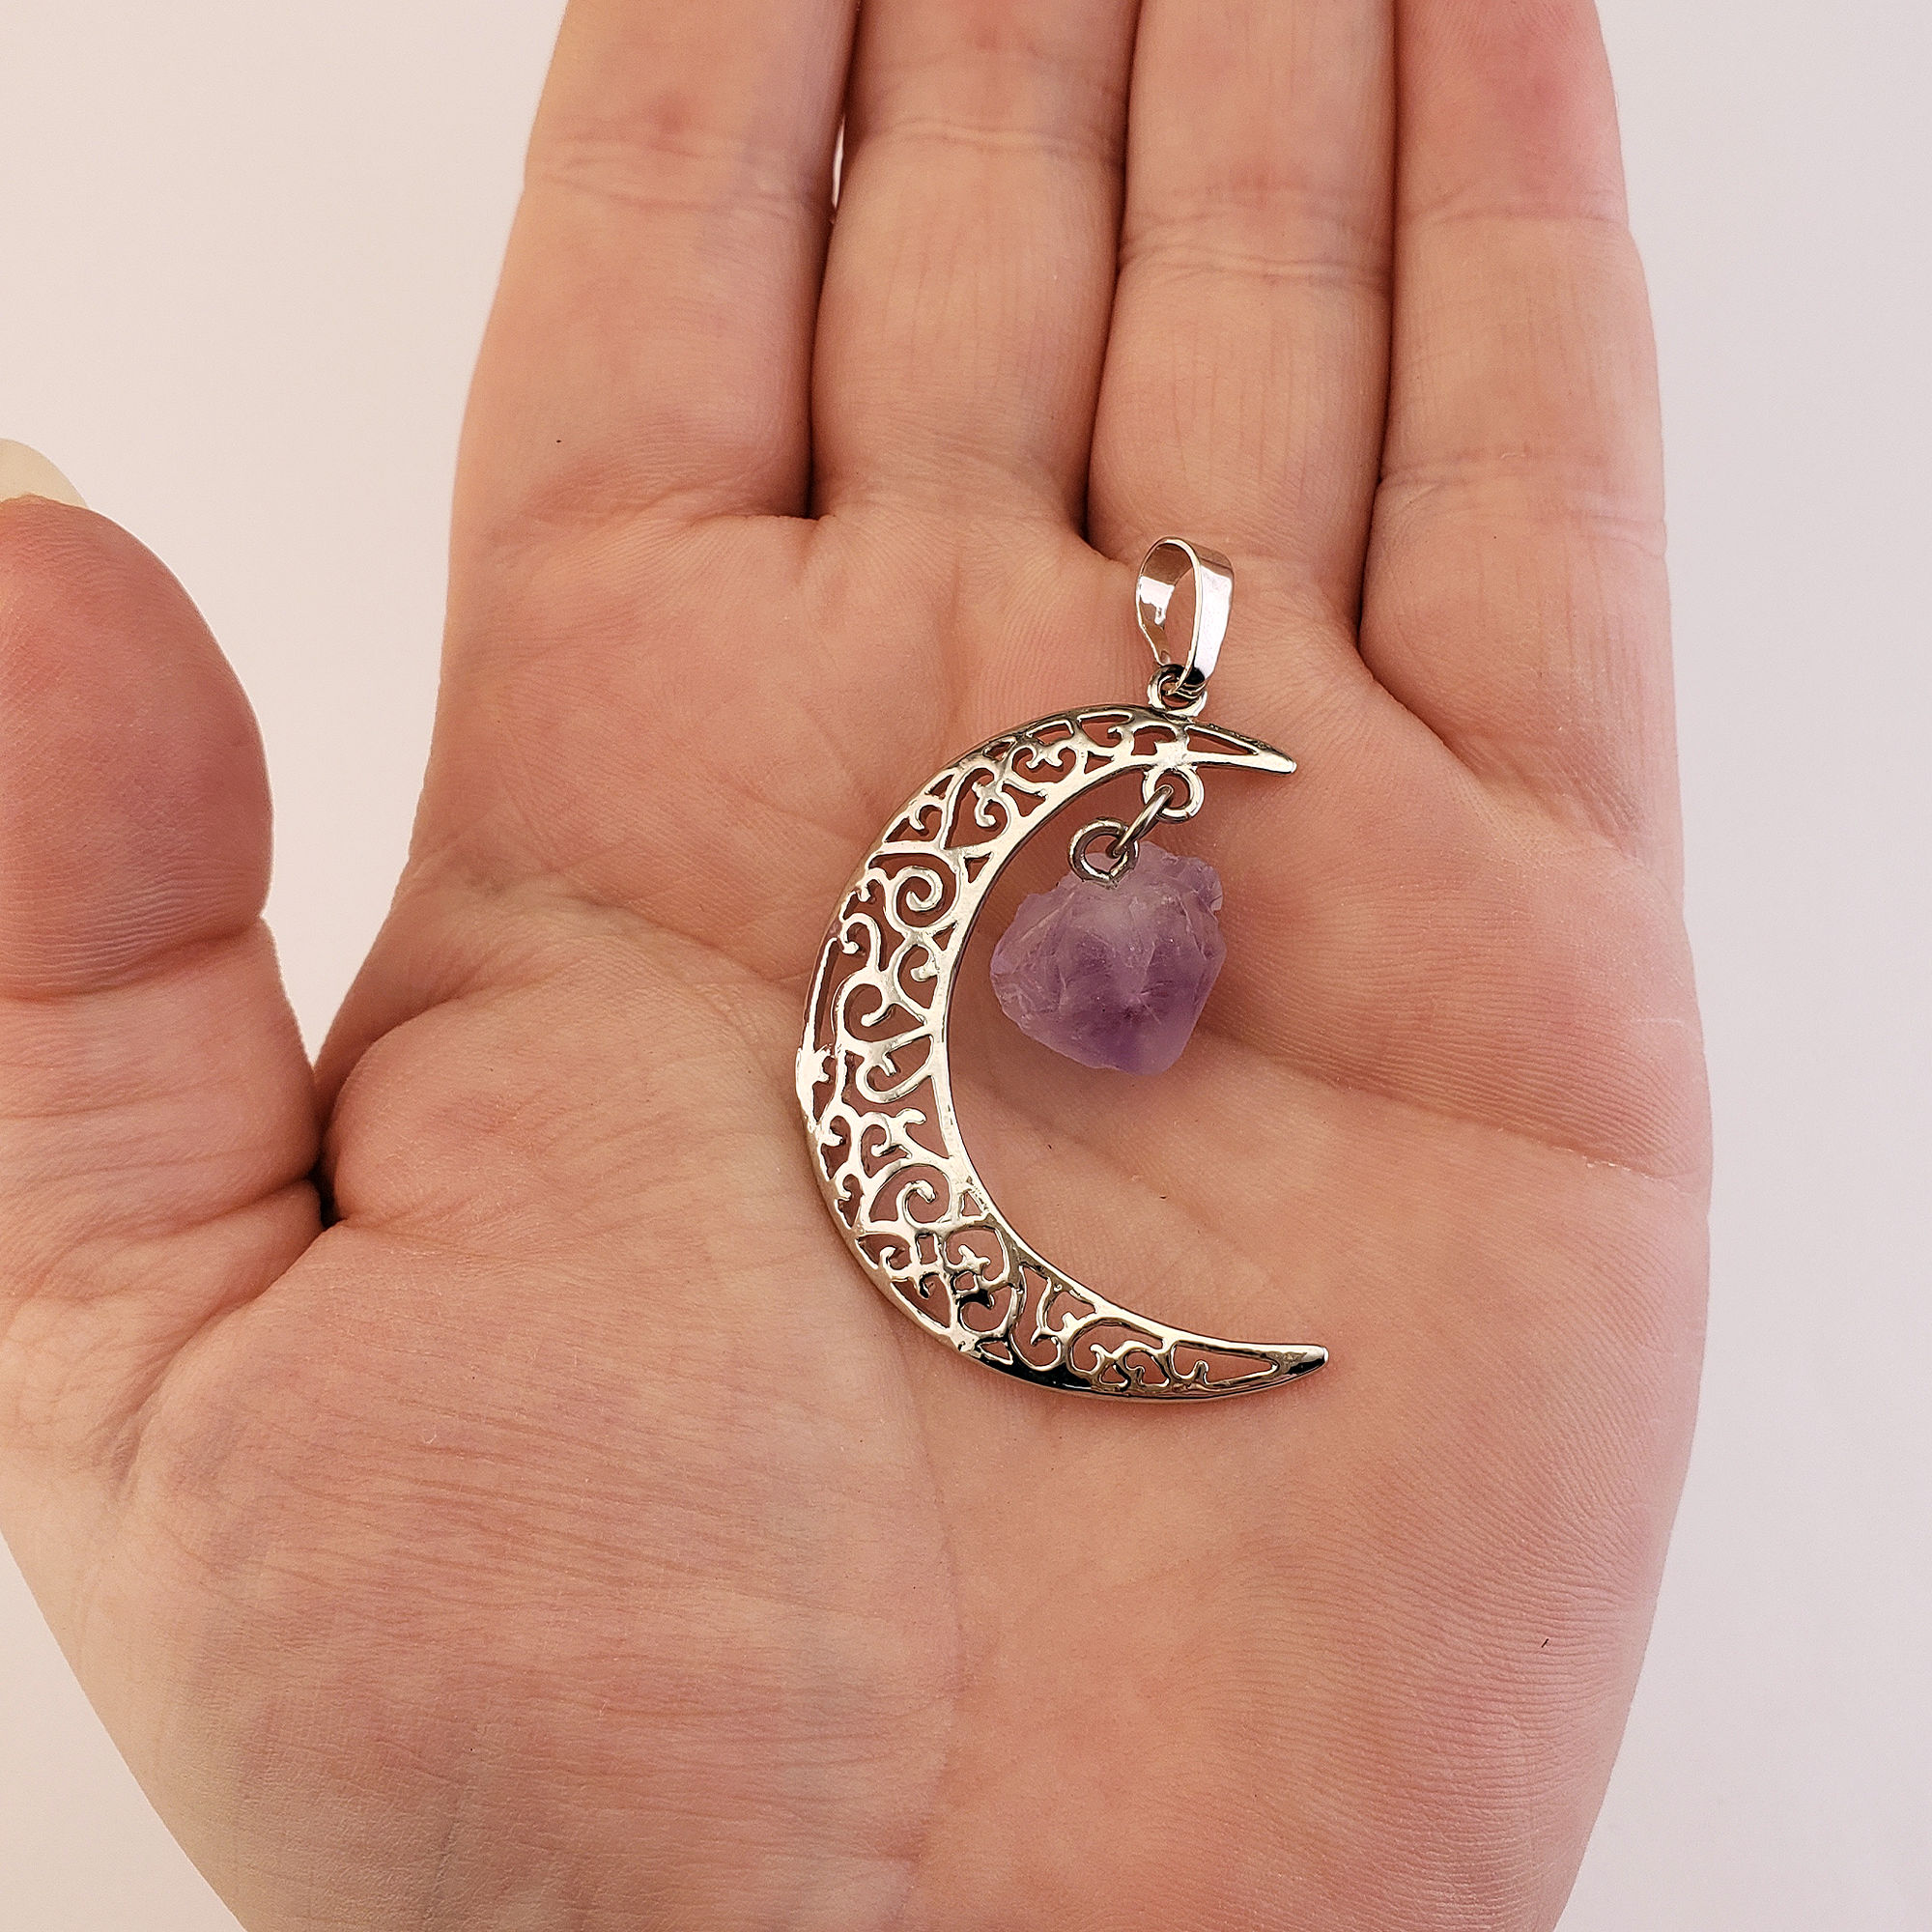 Amethyst Crescent Moon Gemstone Pendant Necklace - In Hand